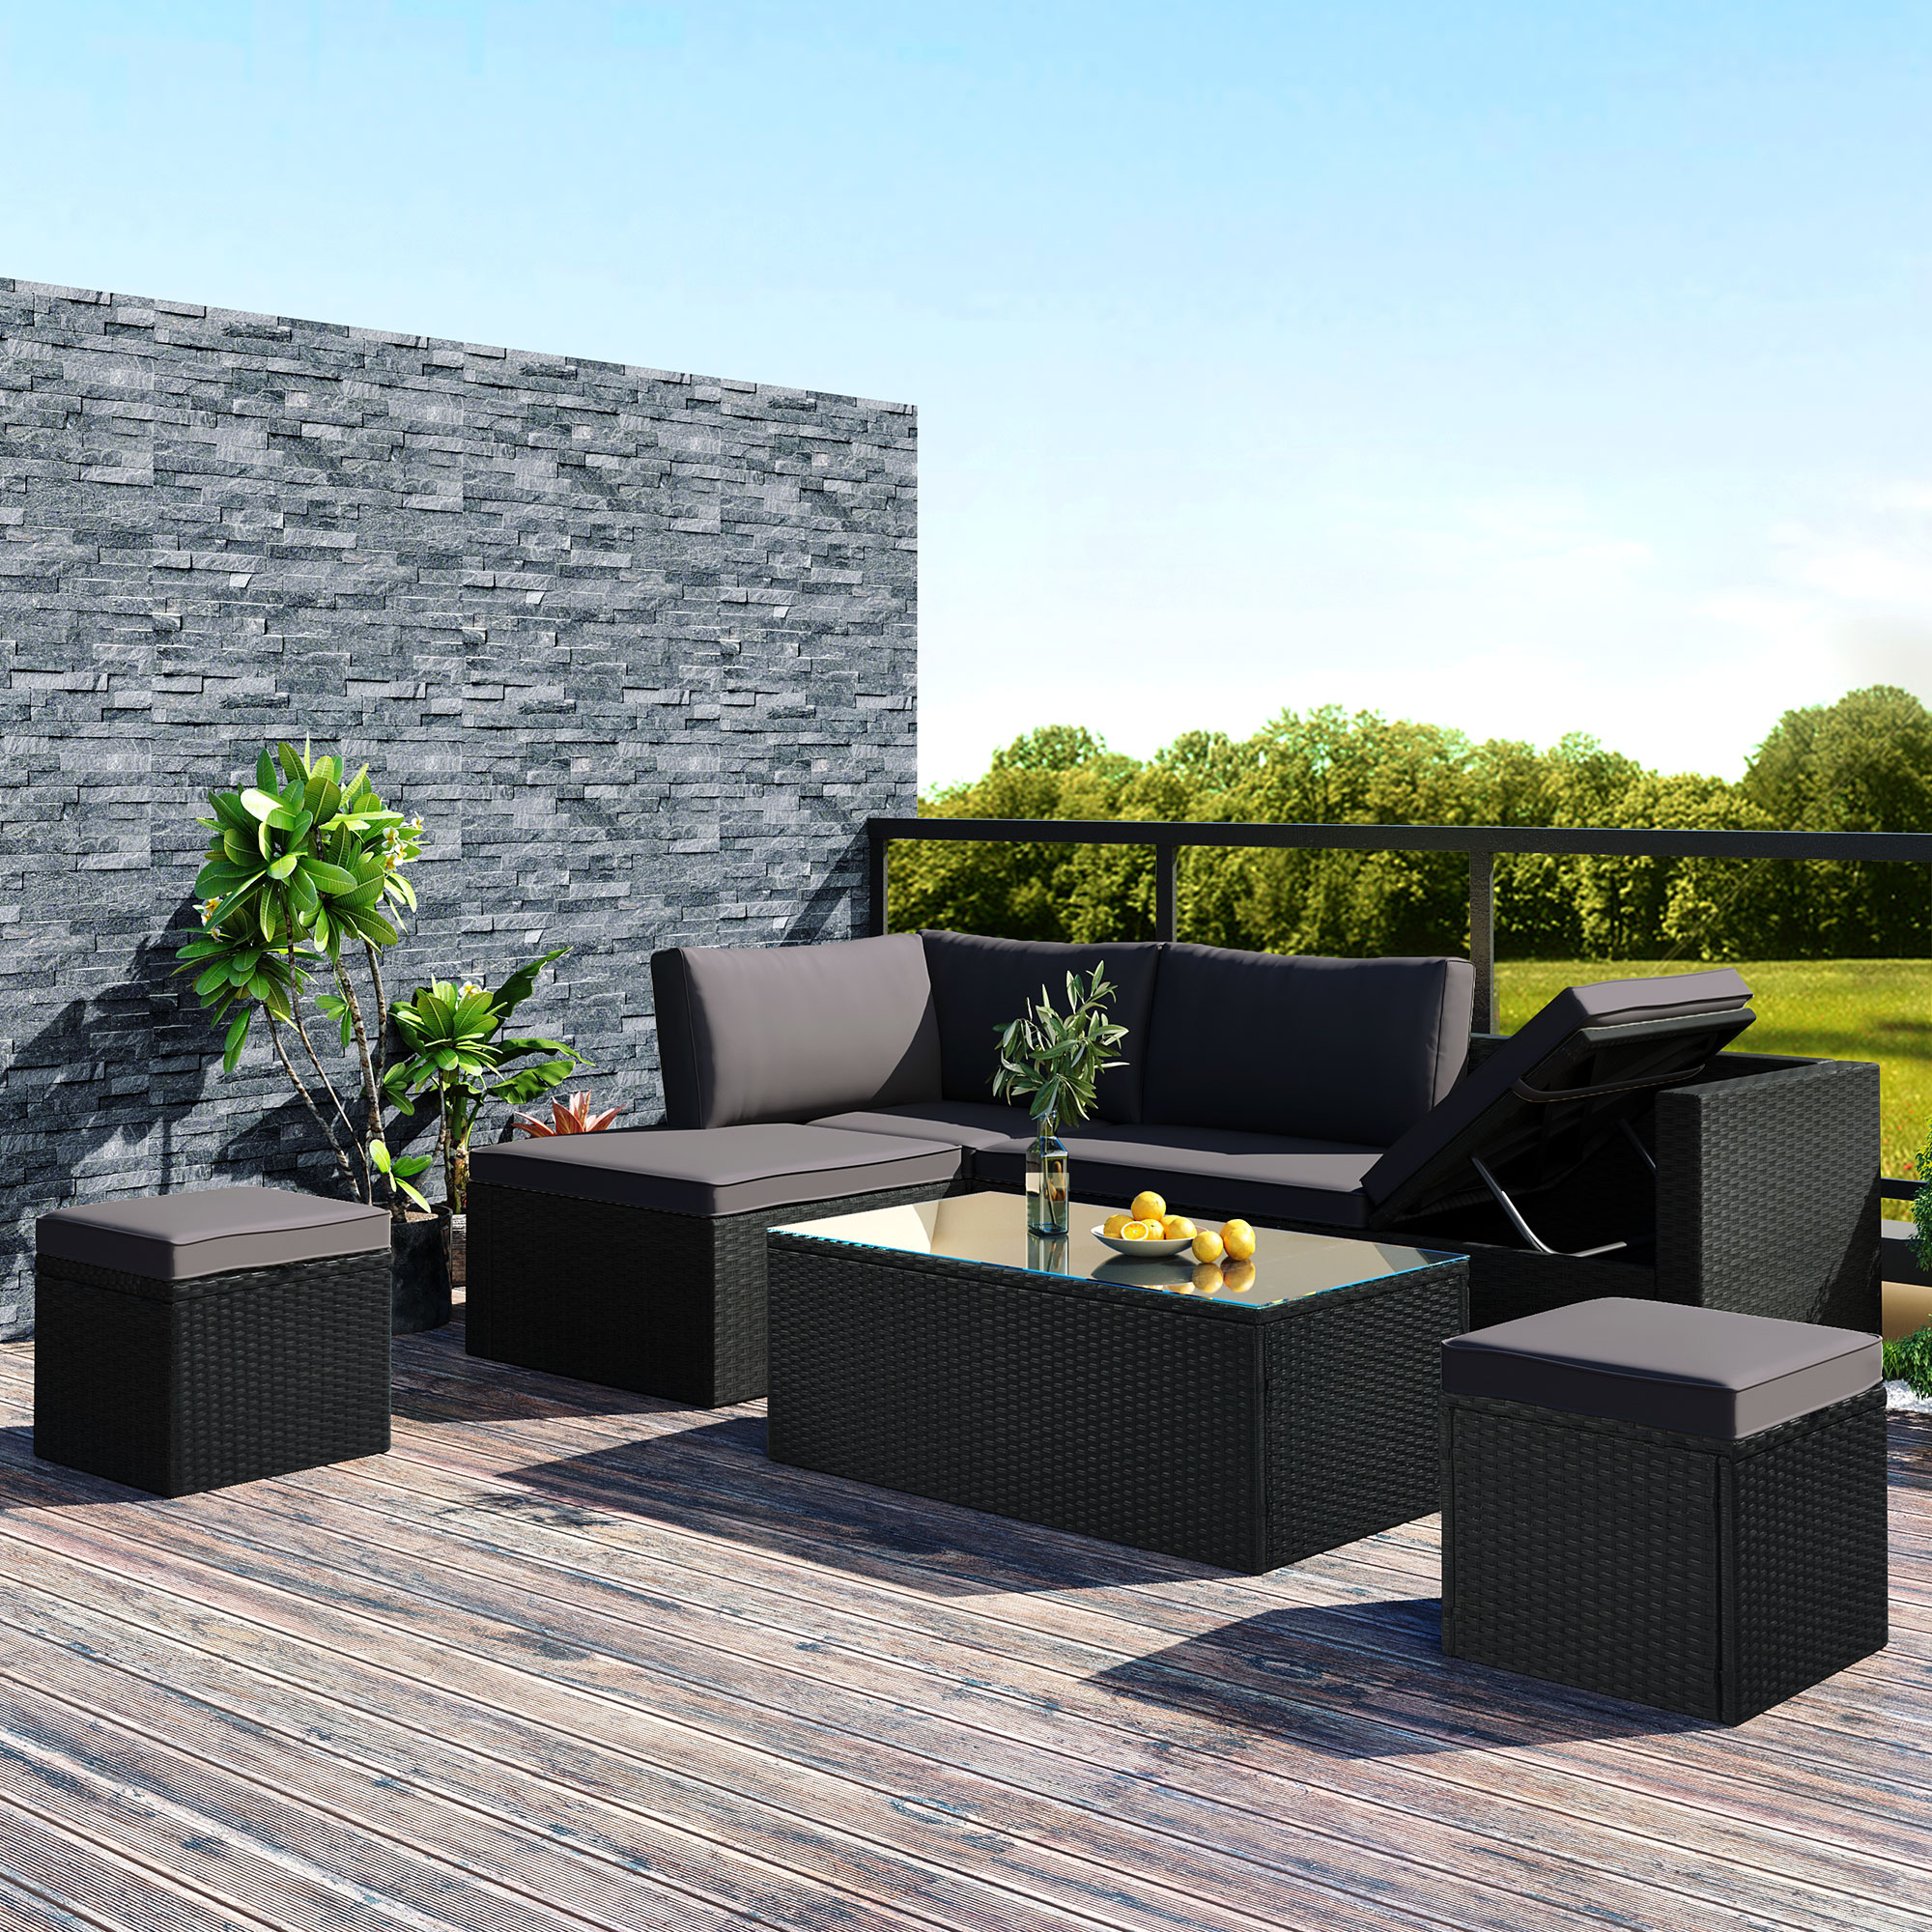 Patio Furniture Sets, Outdoor Sectional Sofa Set Wicker with Adjustable Seat Coffee Table and Ottoman, Outdoor Wicker Sofa Set for Backyard Porch Poolside Garden, Gray - image 1 of 10